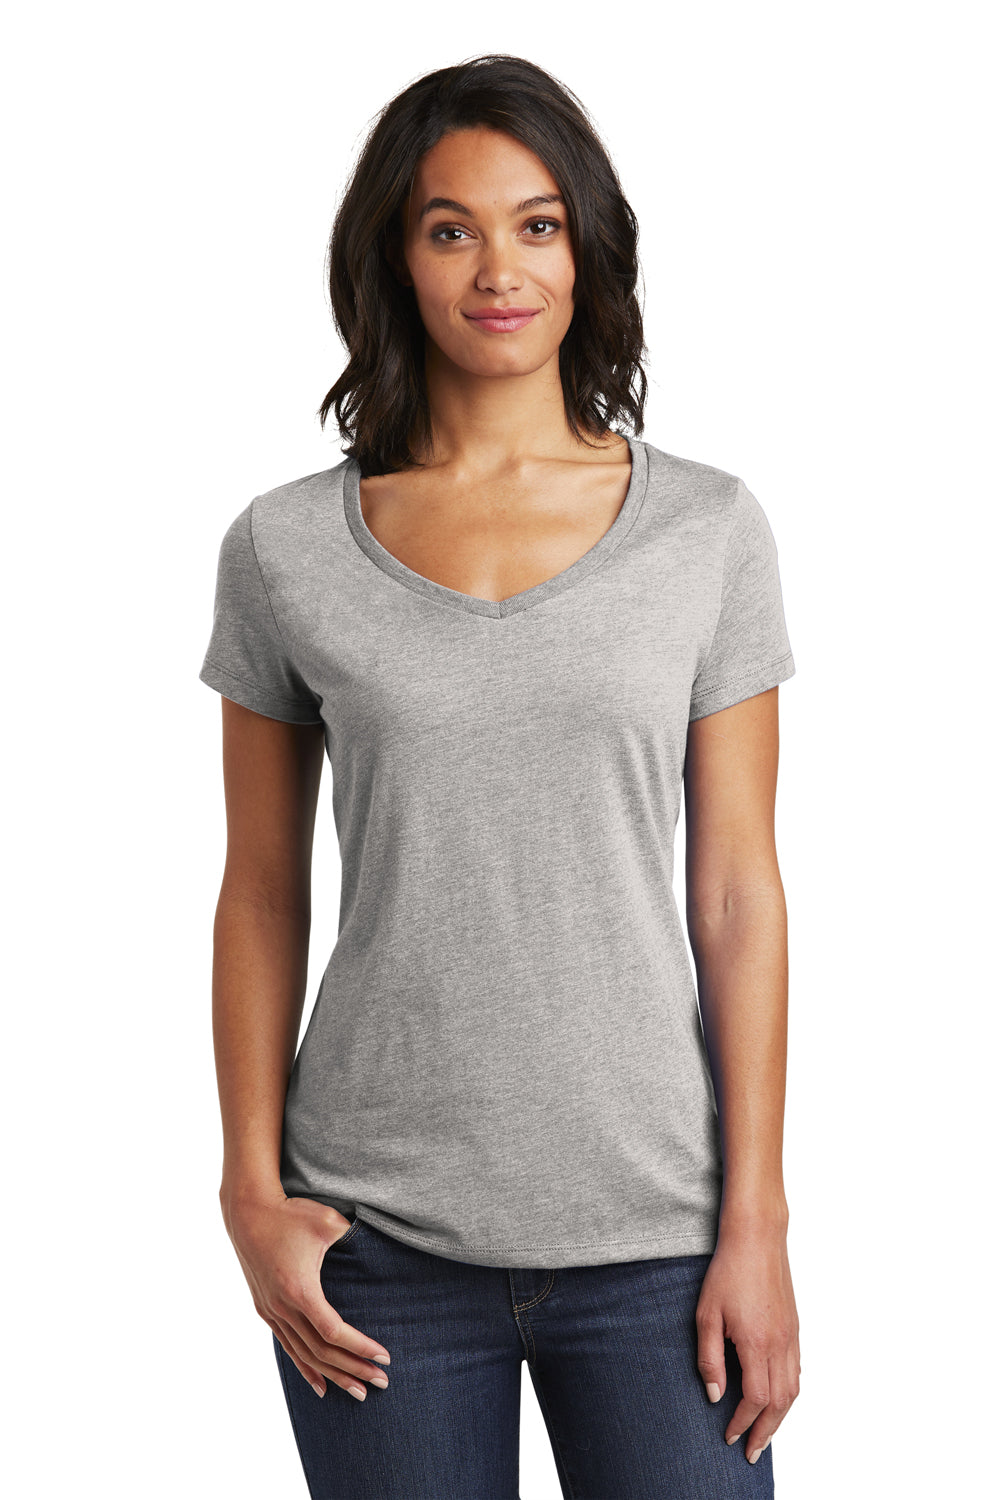 District DT6503 Womens Very Important Short Sleeve V-Neck T-Shirt Heather Light Grey Front